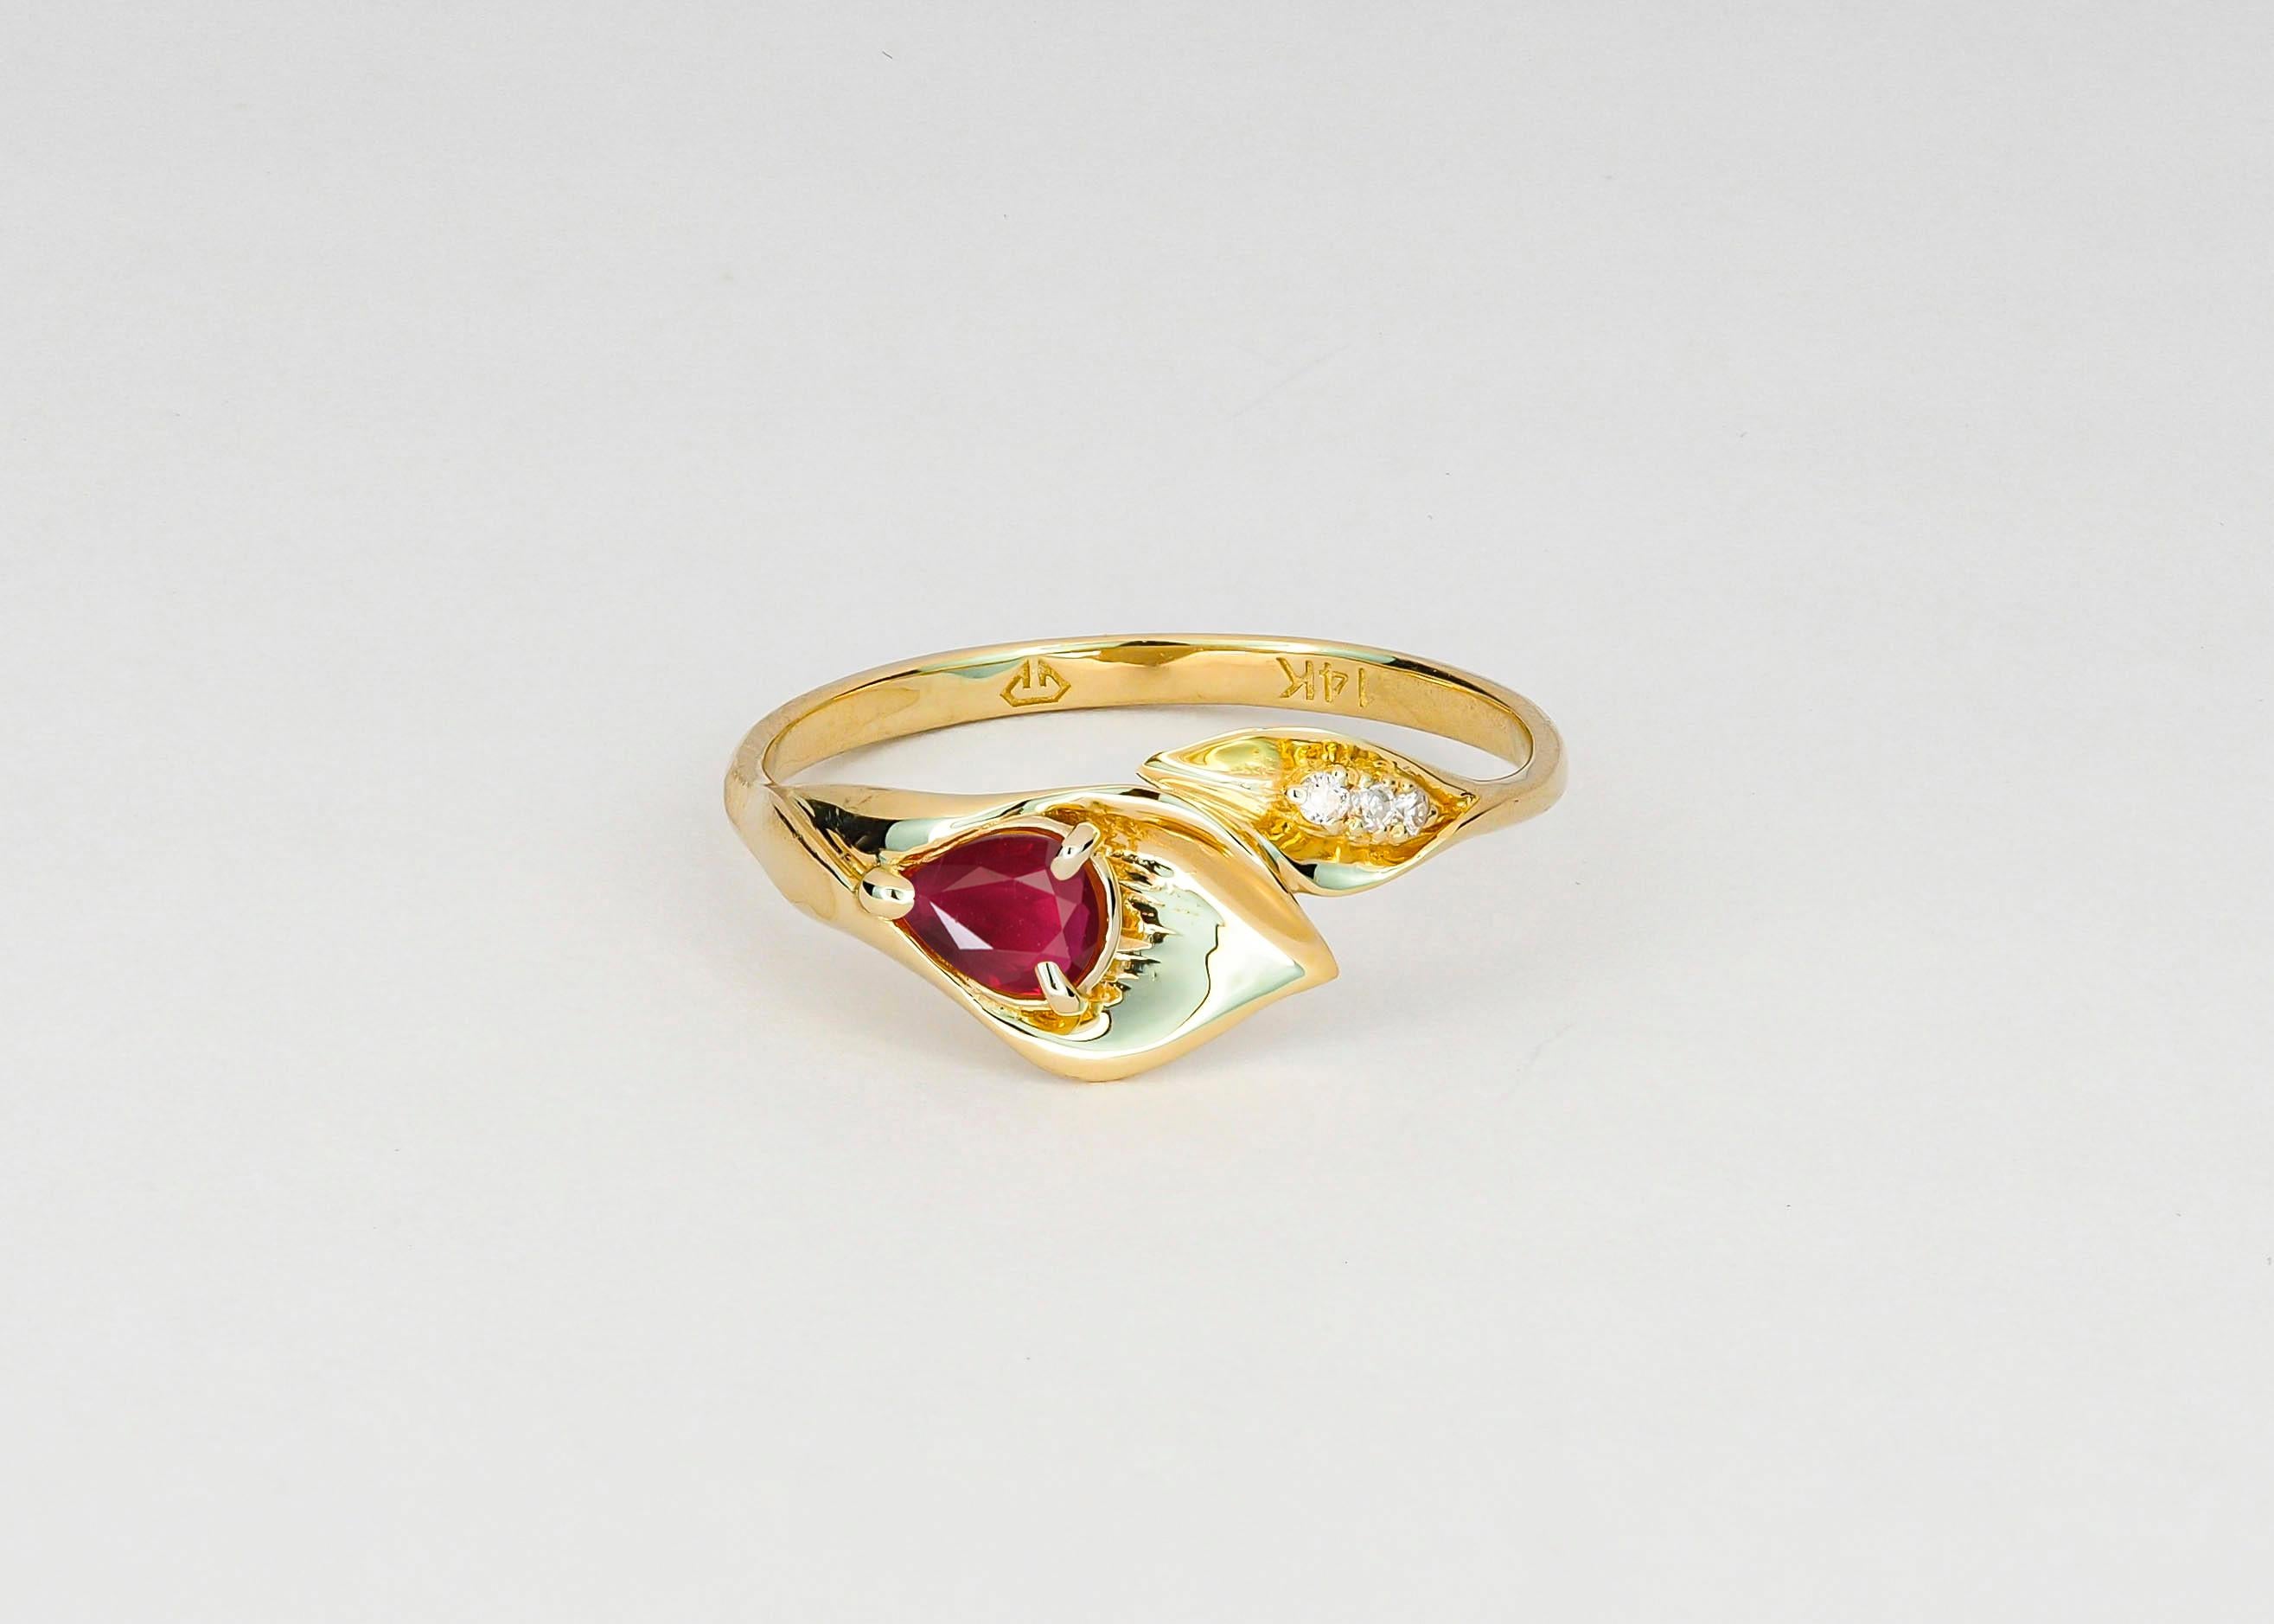 For Sale:  Lily Calla Gold Ring, 14 Karat Gold Ring with Ruby and Diamonds! 7